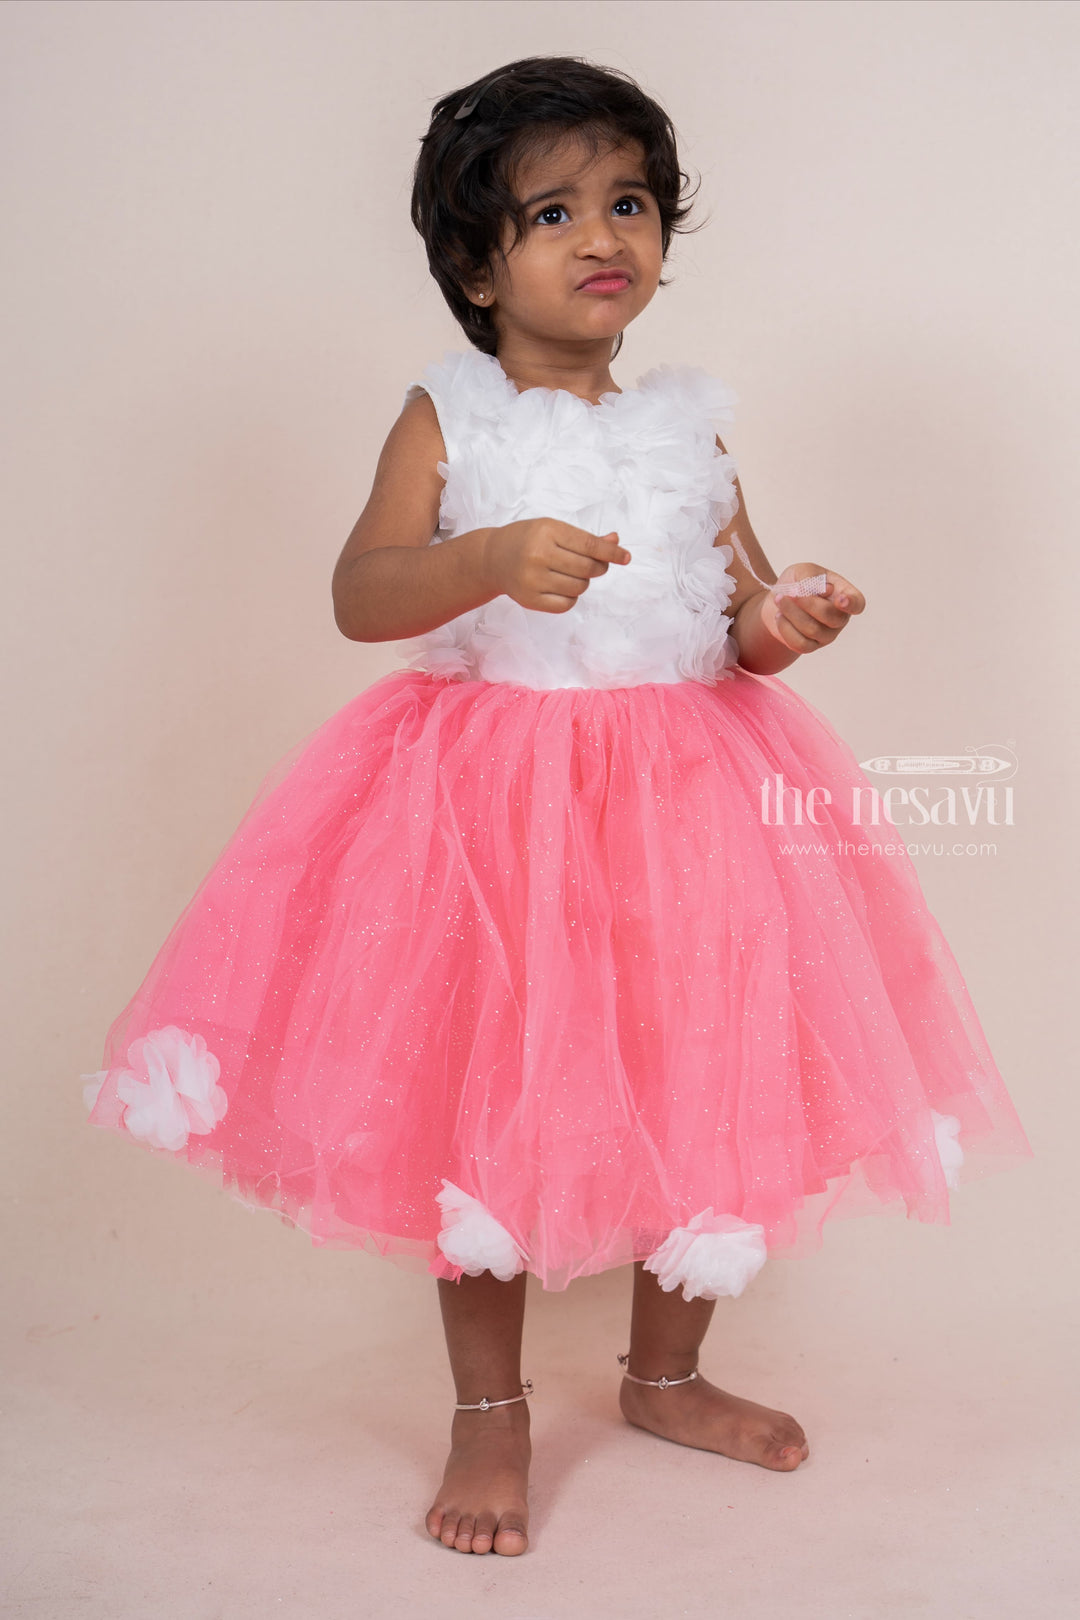 The Nesavu Party Frock Dark Pink With White Floral Embellished Party Frock For Baby Girls psr silks Nesavu 16 (1Y) / darkpink PF69B